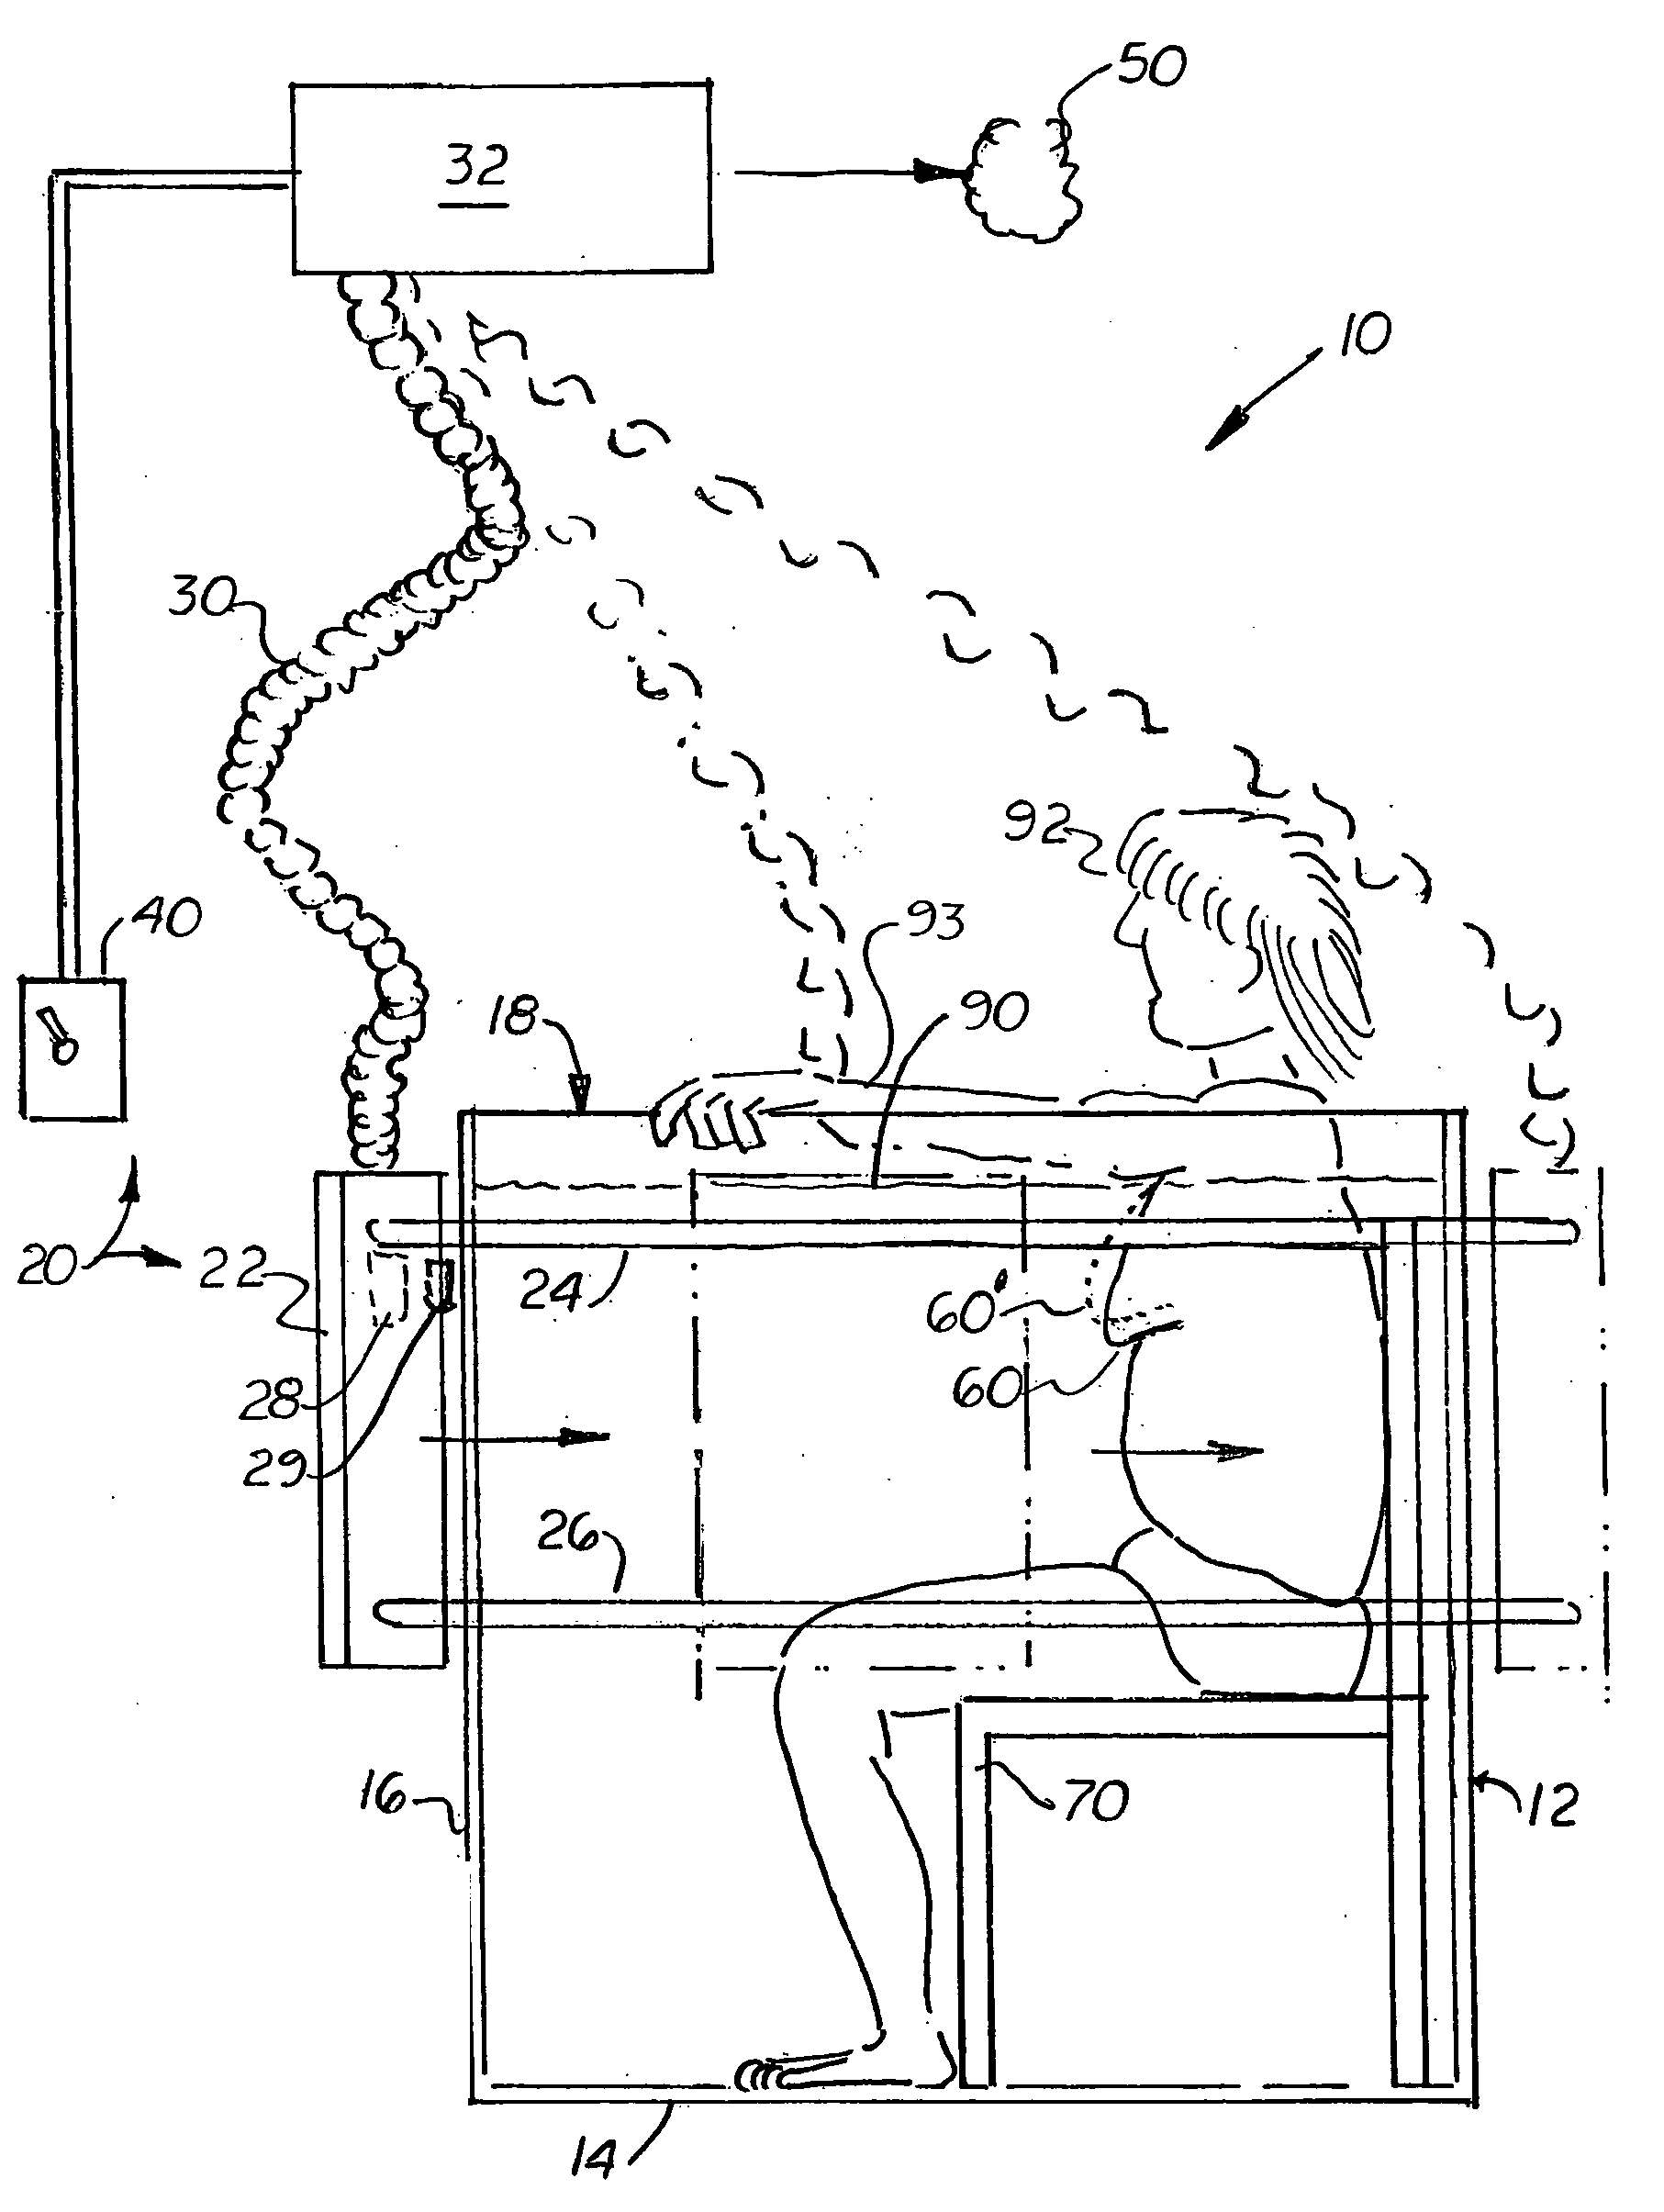 Breast measurement device and bra fitting system